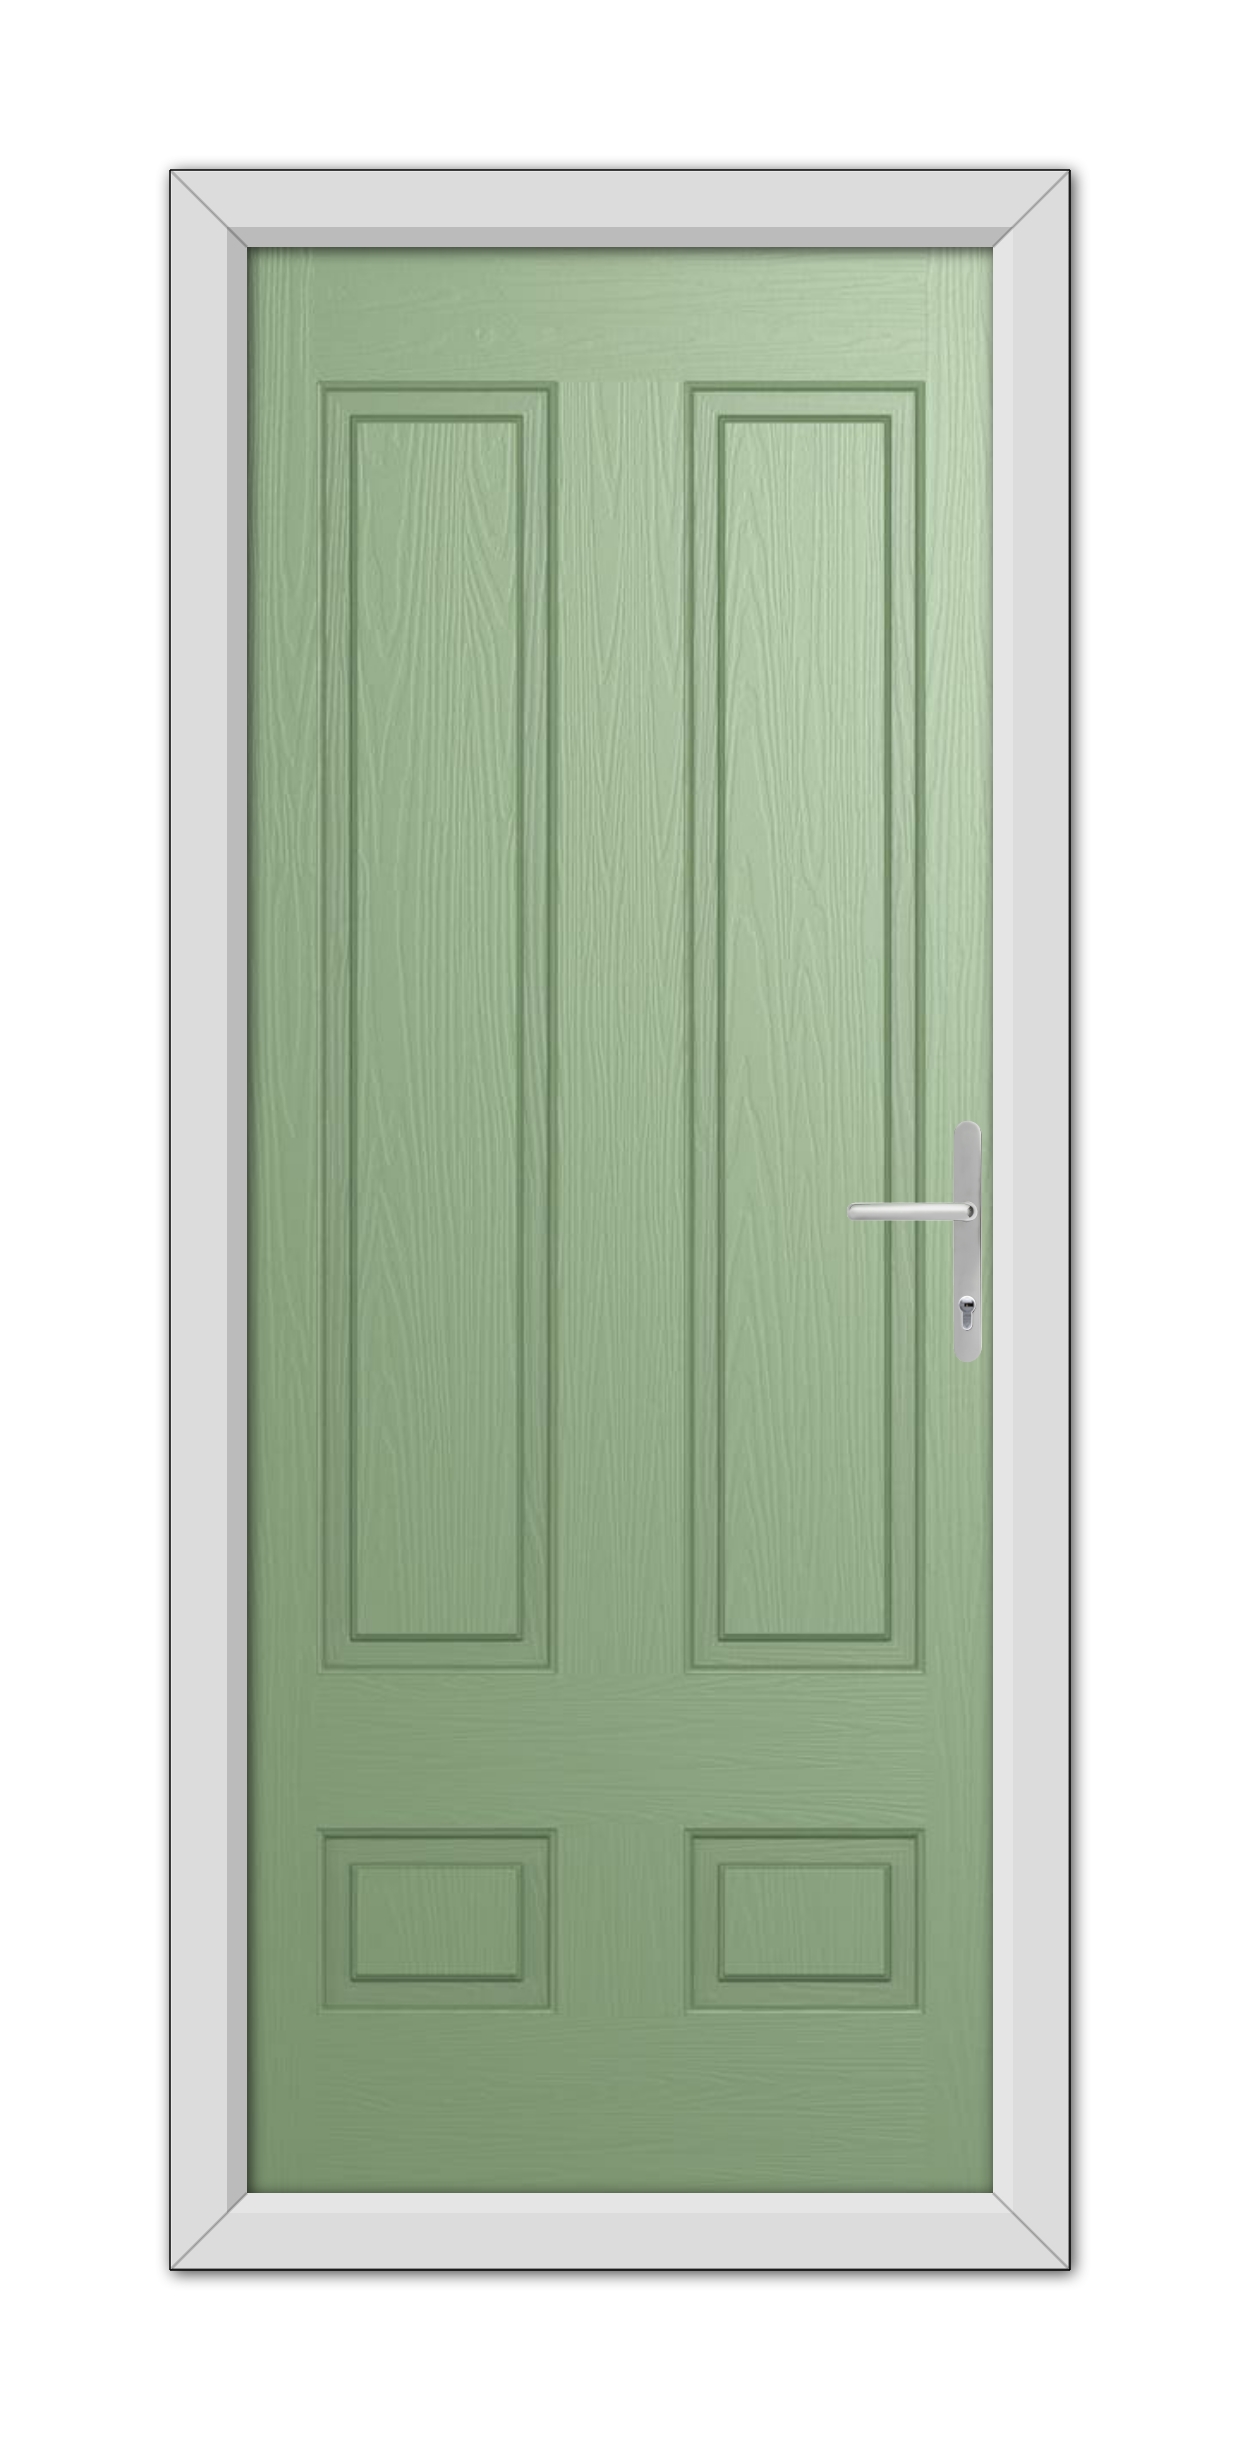 A Chartwell Green Aston Solid Composite Door 48mm Timber Core with a silver handle, set within a white frame, isolated on a white background.